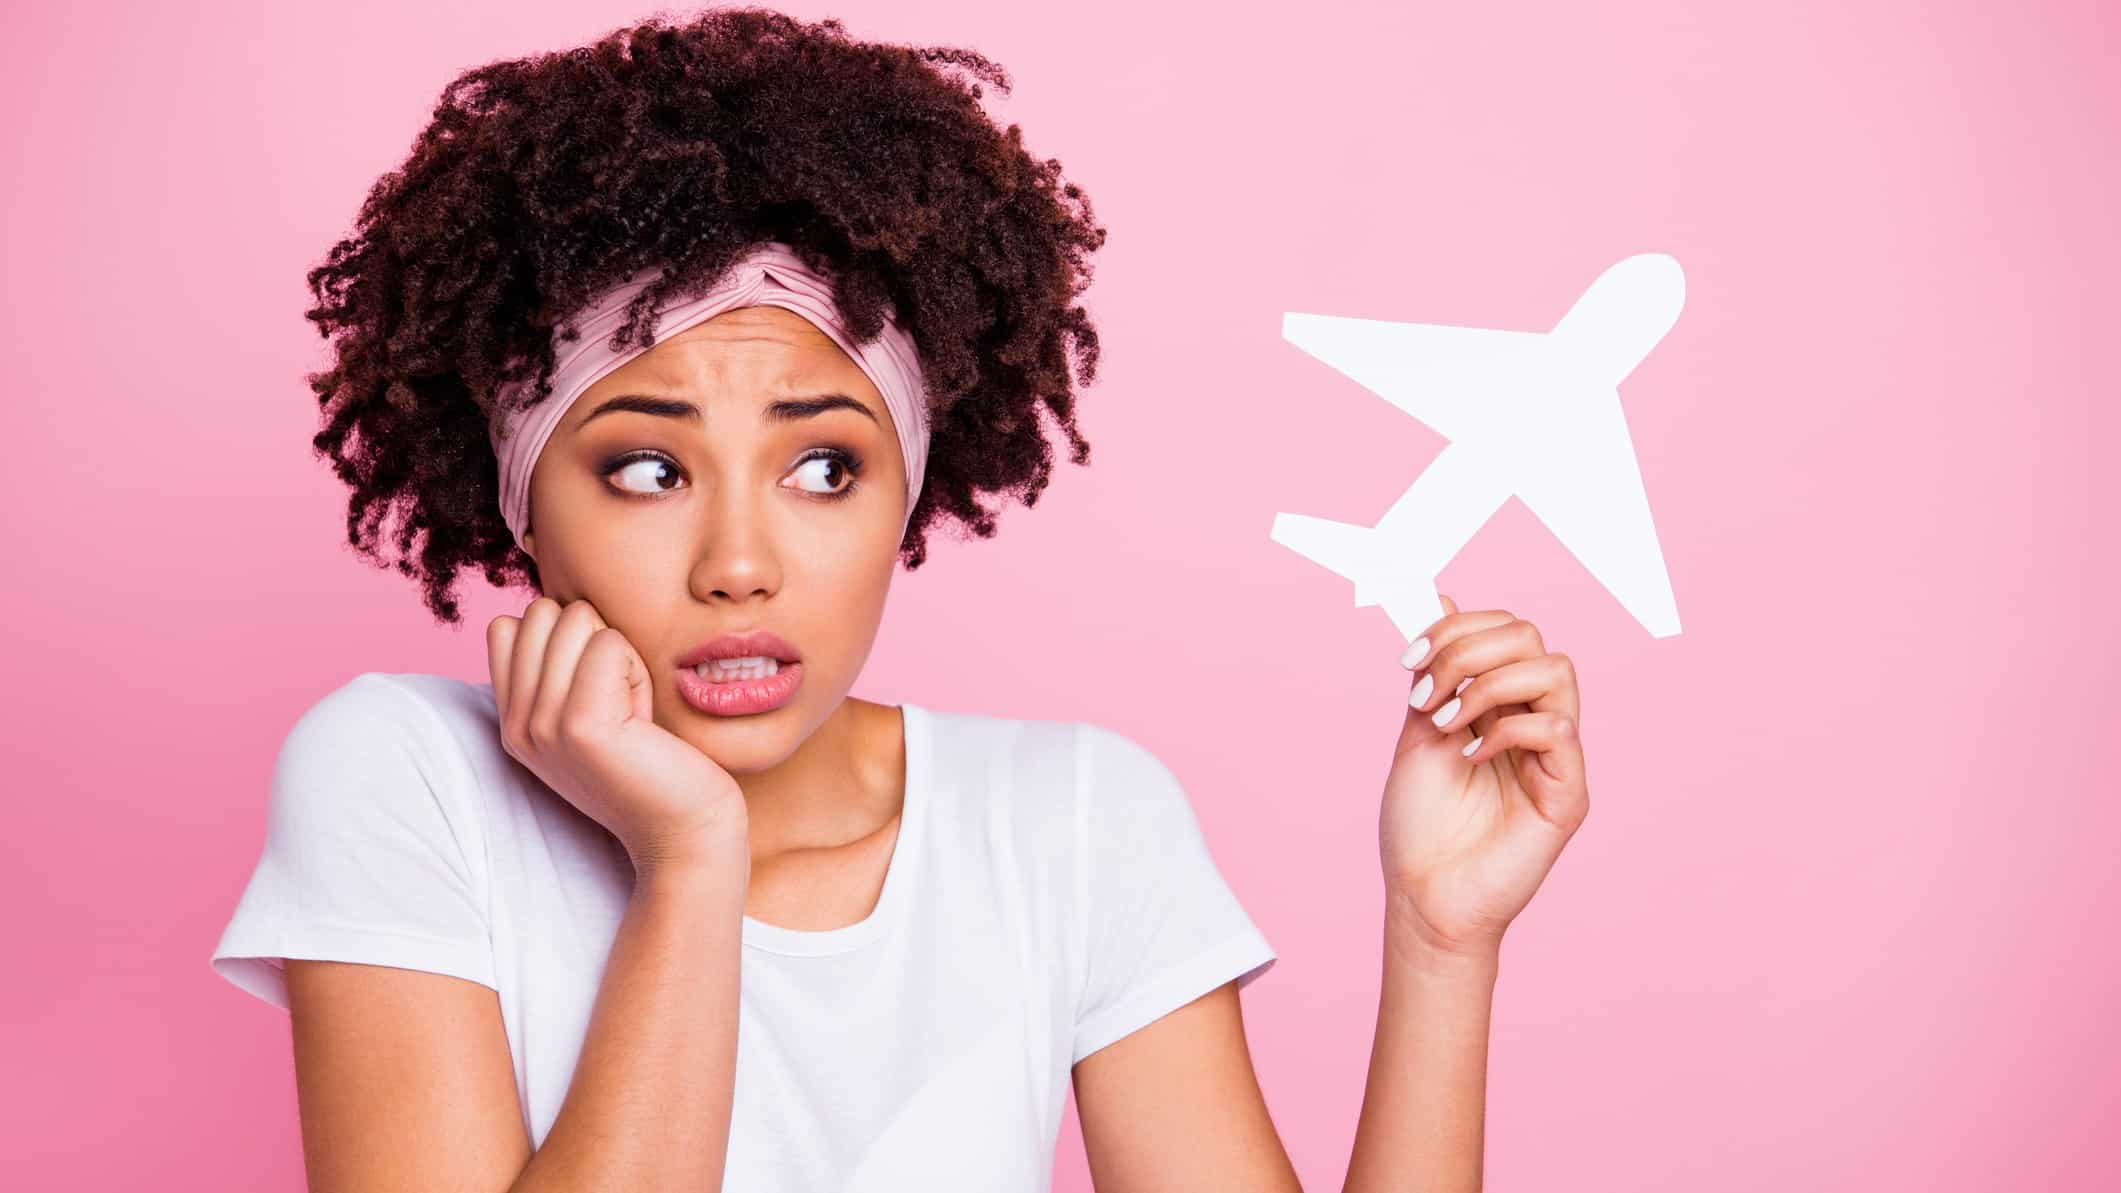 A woman looks nervous and uncertain holding a hand to her chin while looking at a paper cut out of a plane that she's holding in her other hand. representing the falling Air New Zealand share price today